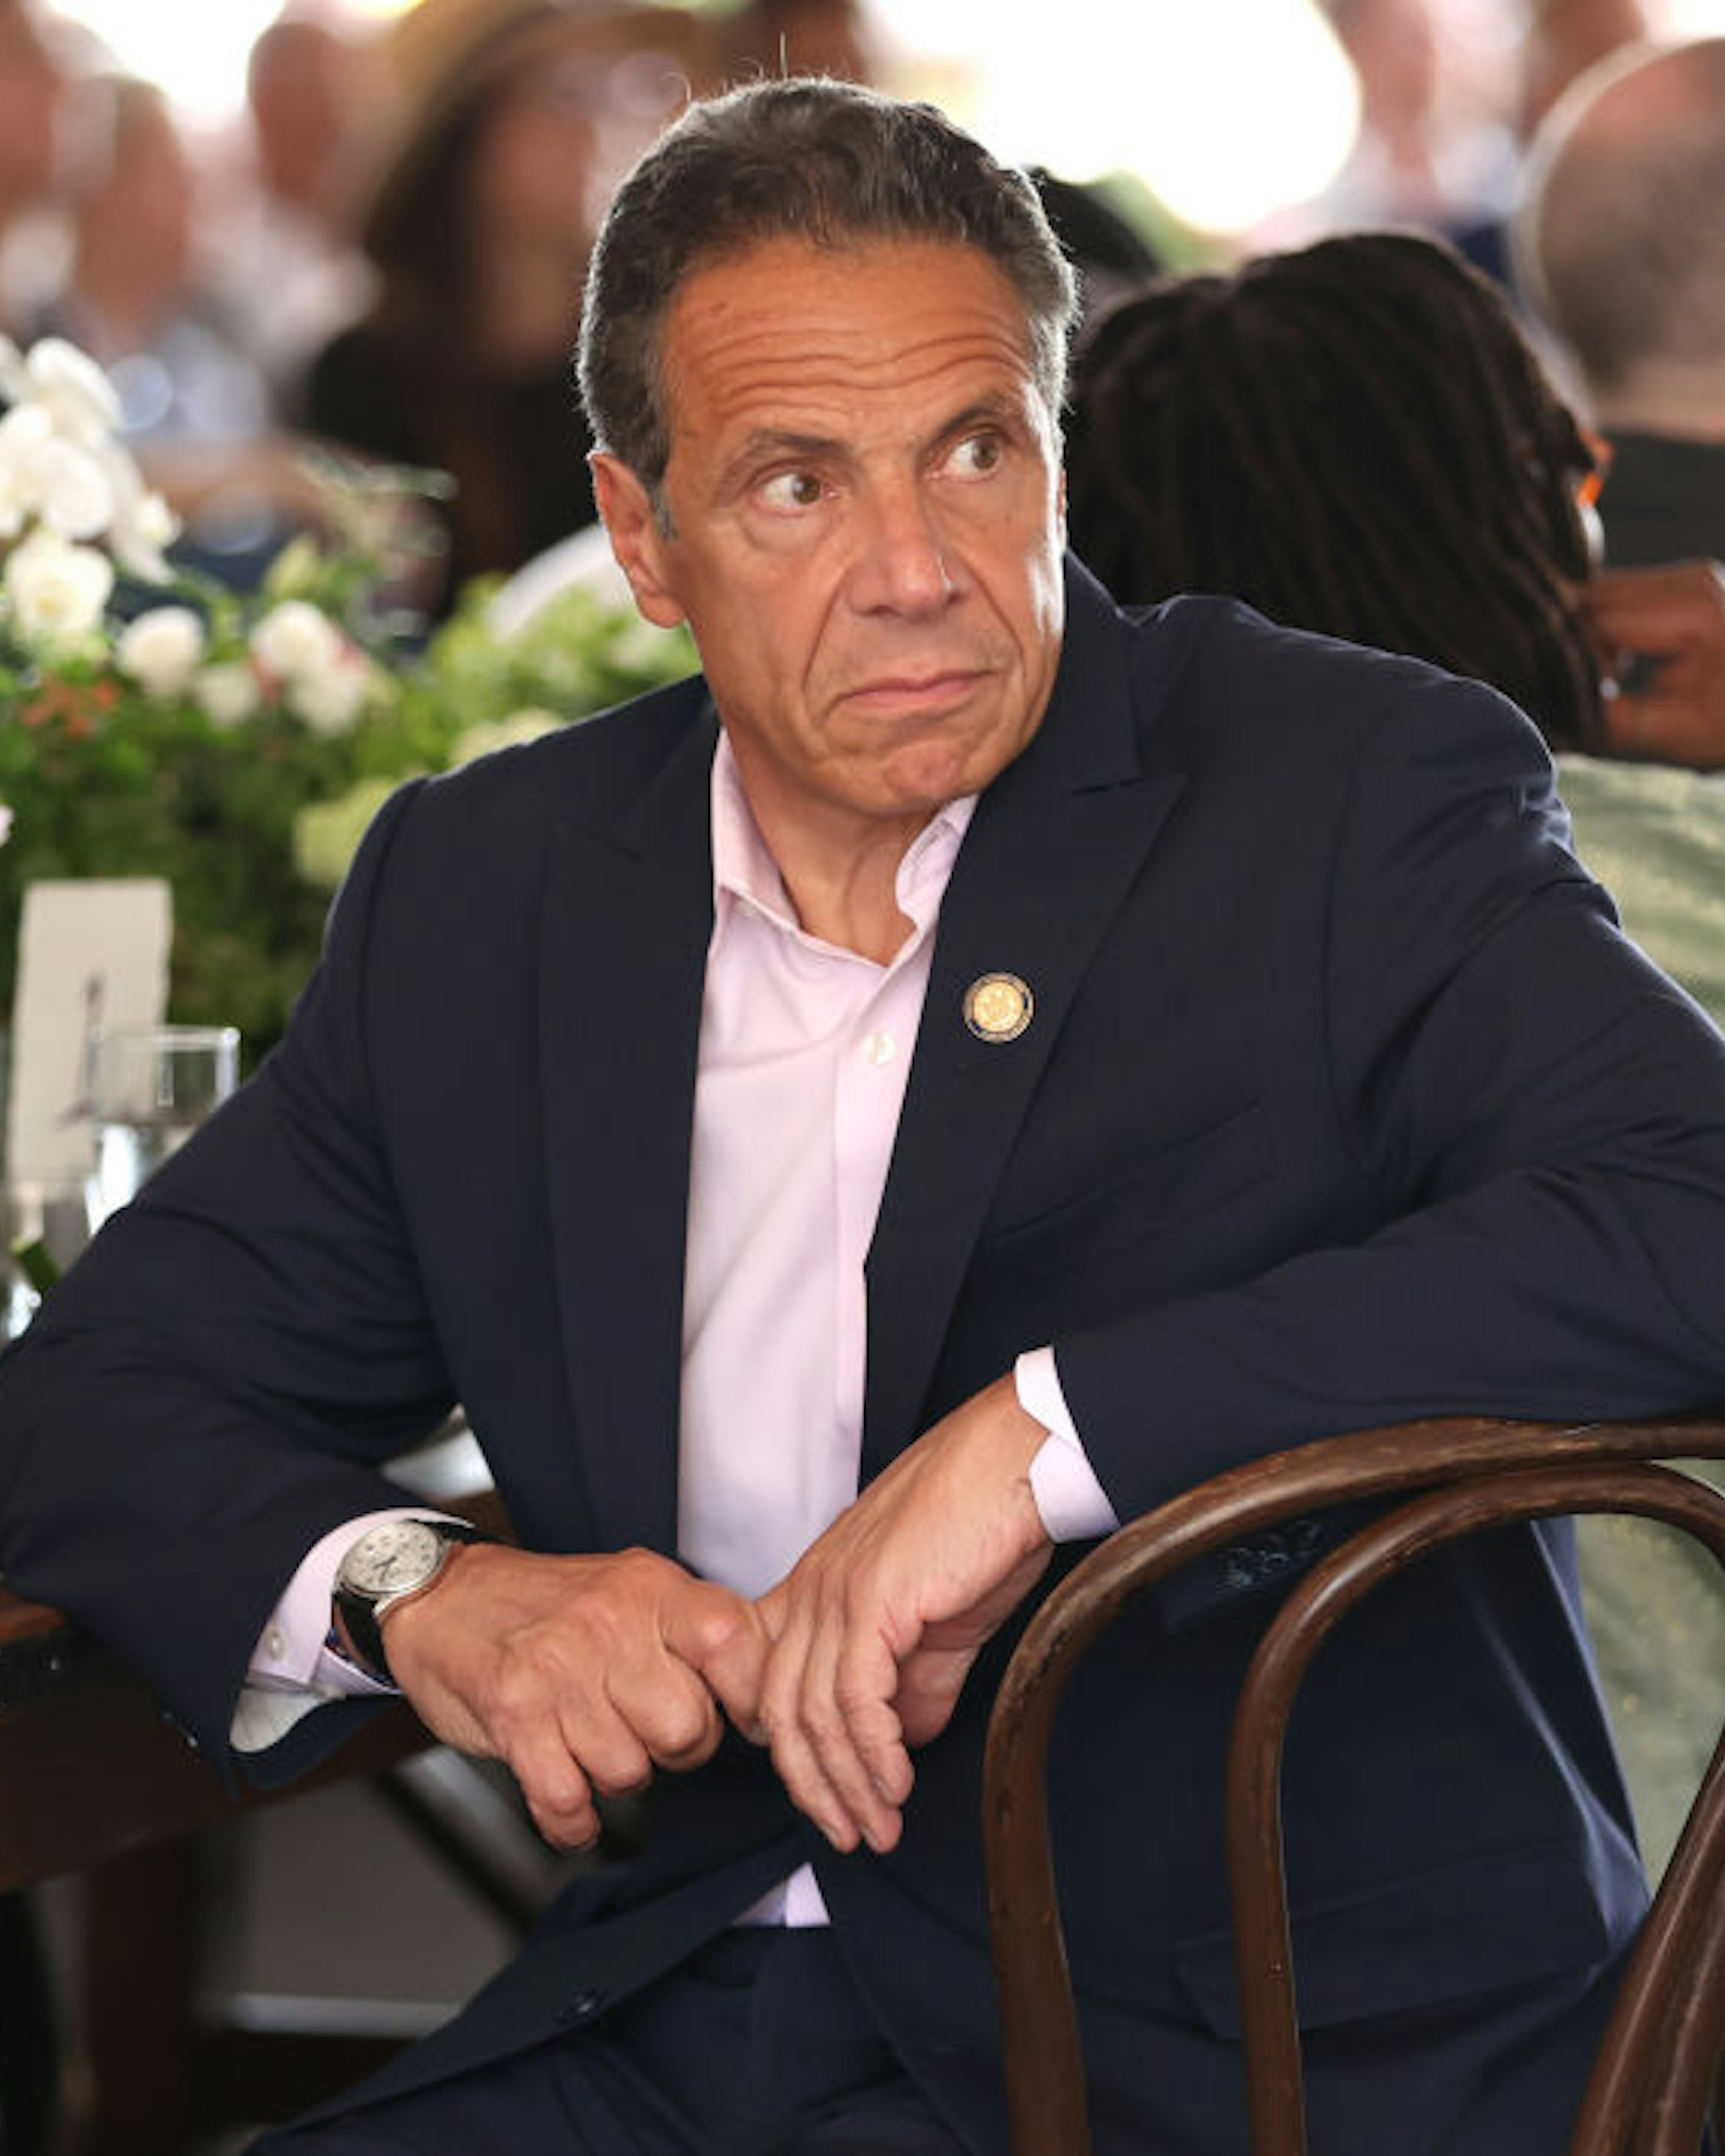 NEW YORK, NEW YORK - JUNE 09: Governor of New York Andrew Cuomo attends the Tribeca Festival Welcome Lunch during the 2021 Tribeca Festival at Pier 76 on June 09, 2021 in New York City. (Photo by Cindy Ord/Getty Images for Tribeca Festival)